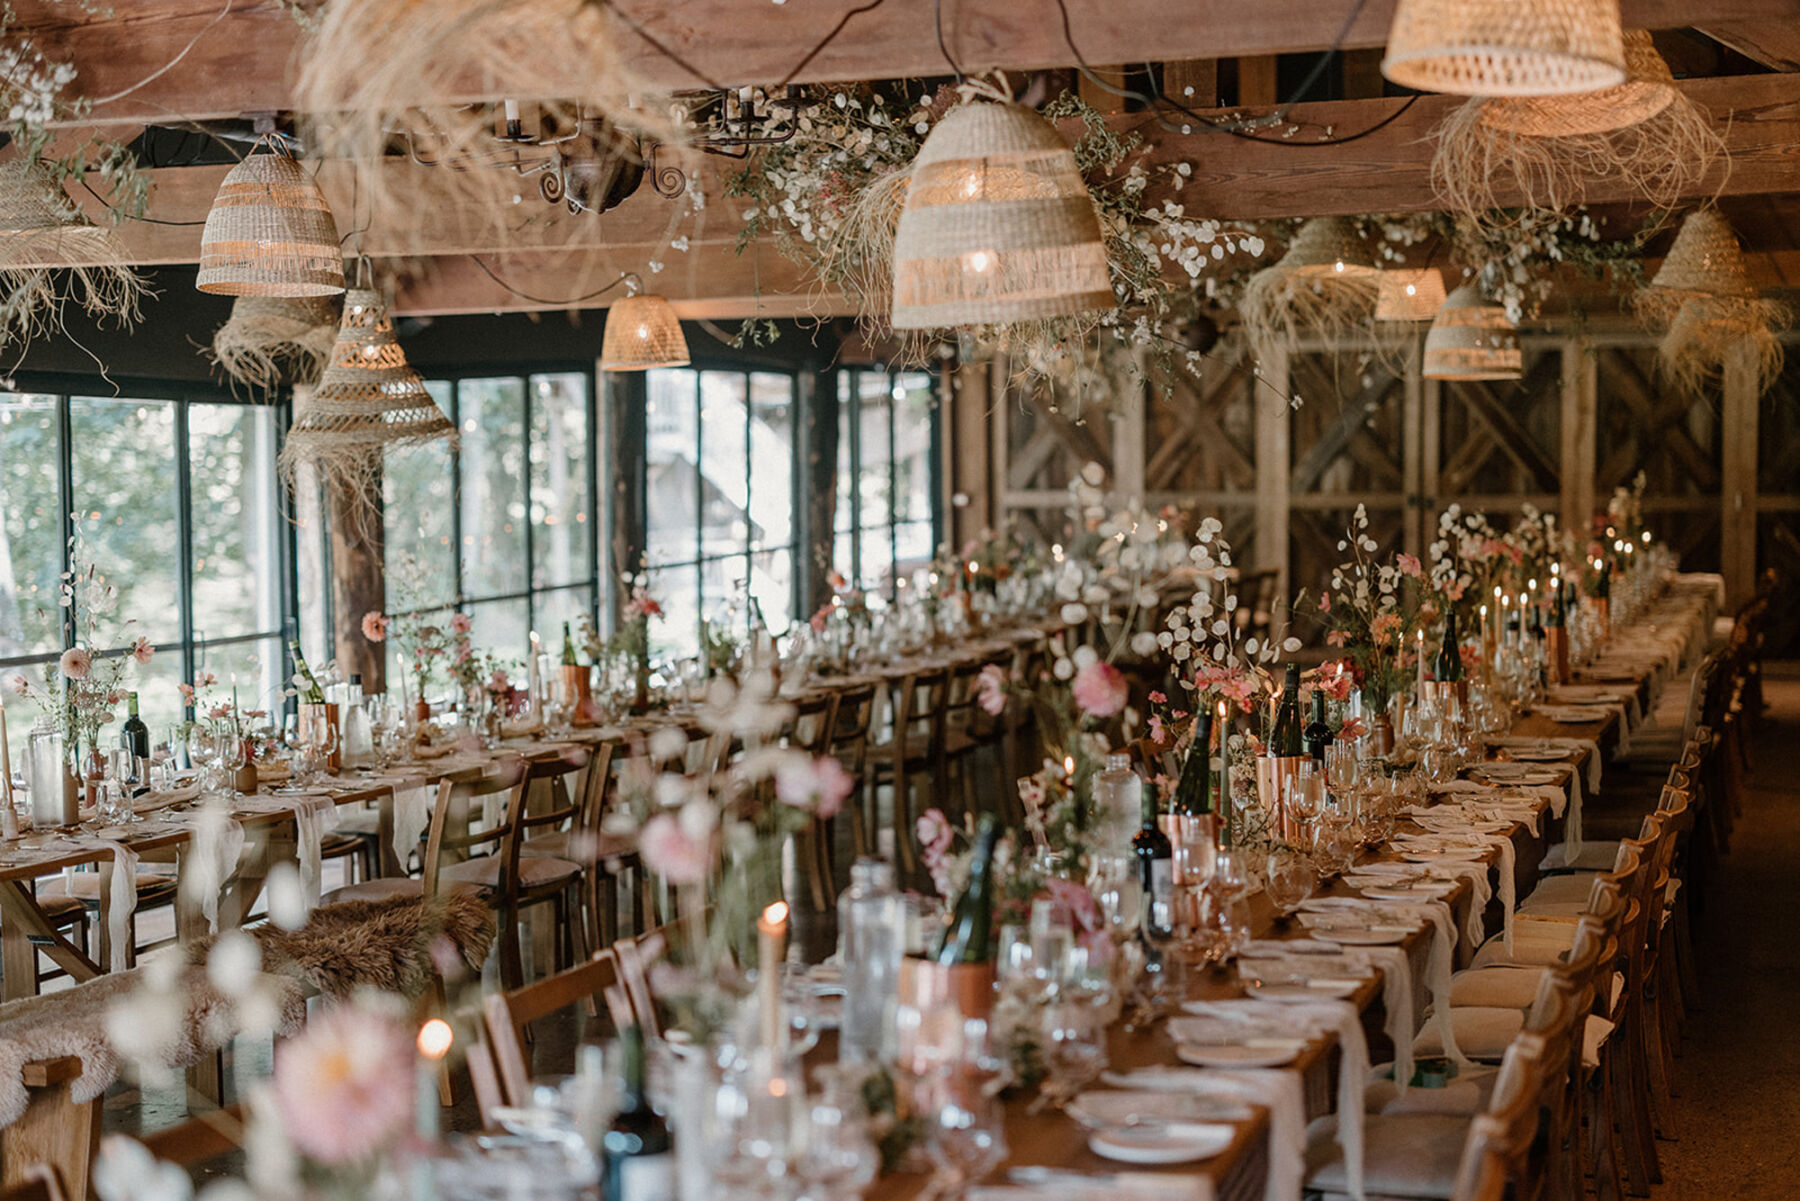 Reception in the wedding barn at Dewsall Court, country house wedding venue in Herefordshire